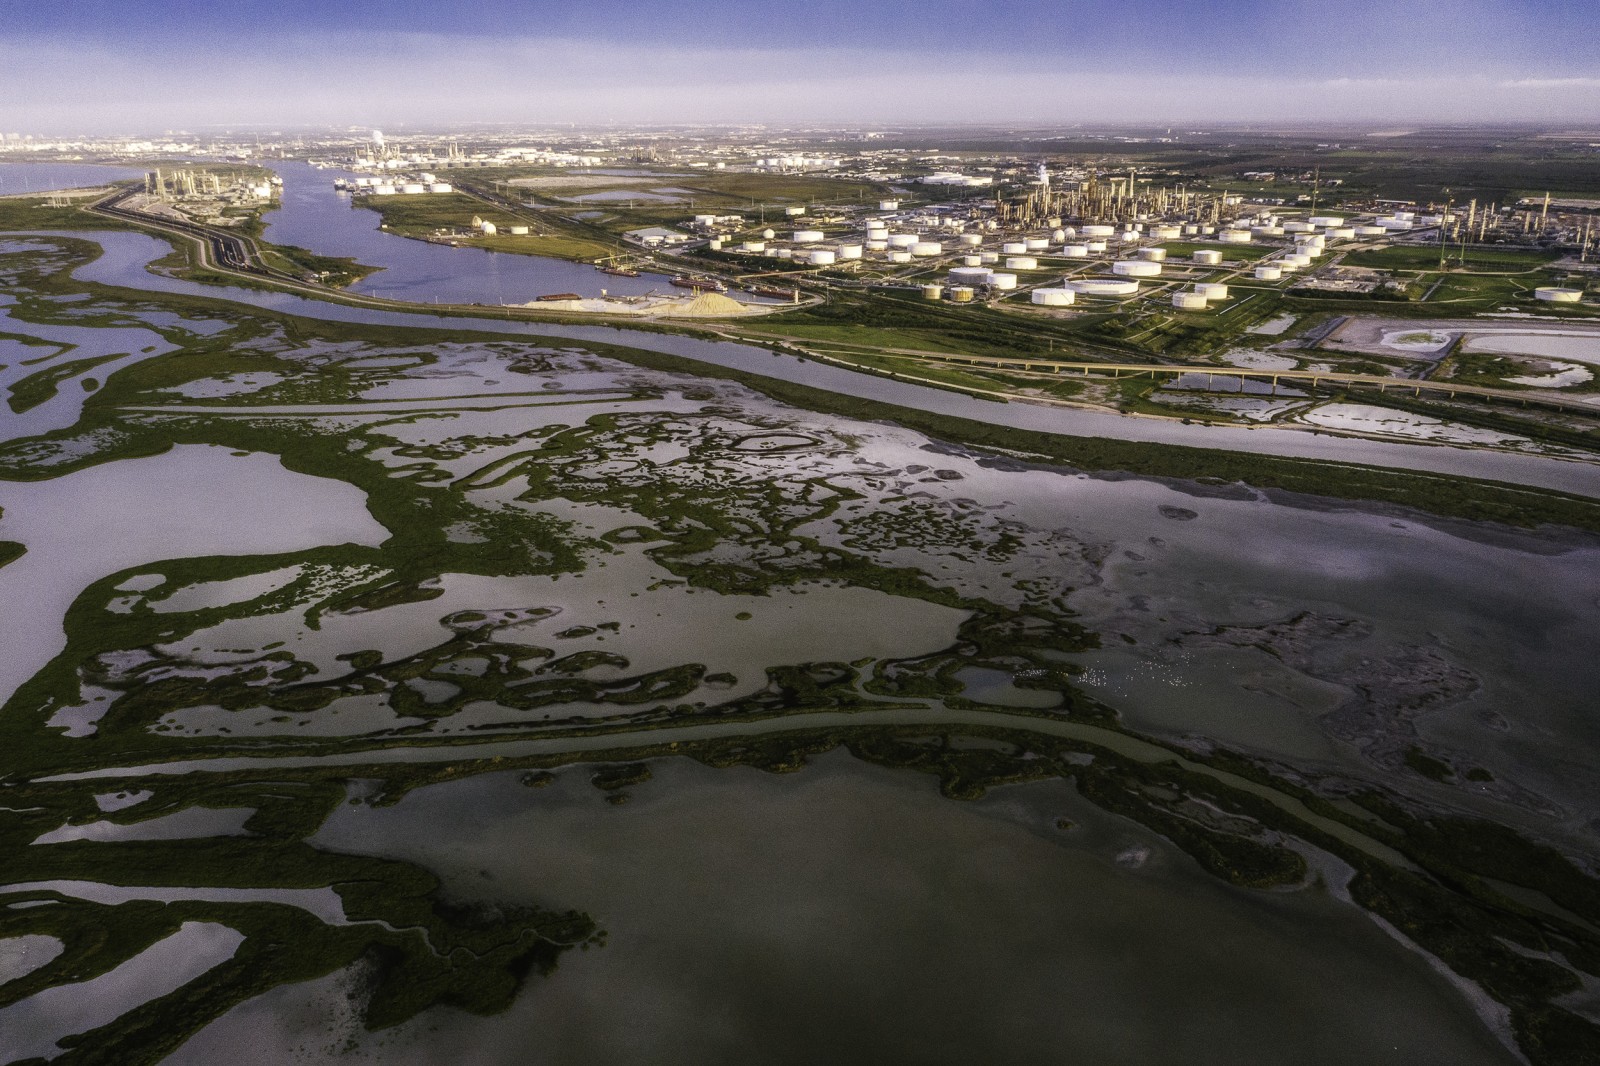 Water, Texas - Circle of BlueGrowth in Wet Years, Economic Distress in Dry Ones- Opportunity to Protect A Way of Life Confronted by Oil and Clea...